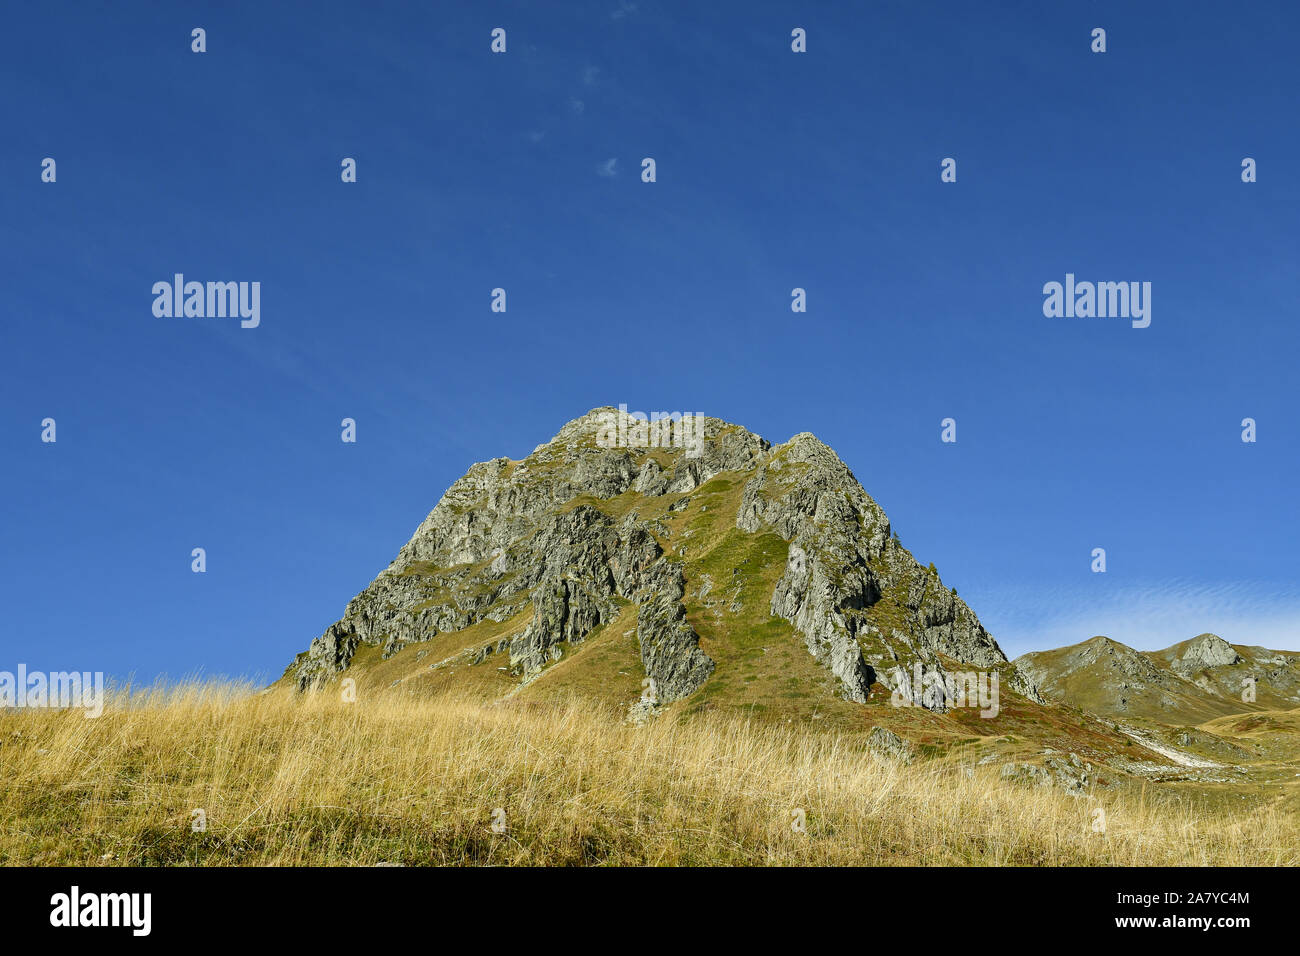 View of Colle Parvetto rocky peak in the Cottian Alps of Piedmont (Northern Italy) against clear blue sky in late summer, Castelmagno, Cuneo, Italy Stock Photo